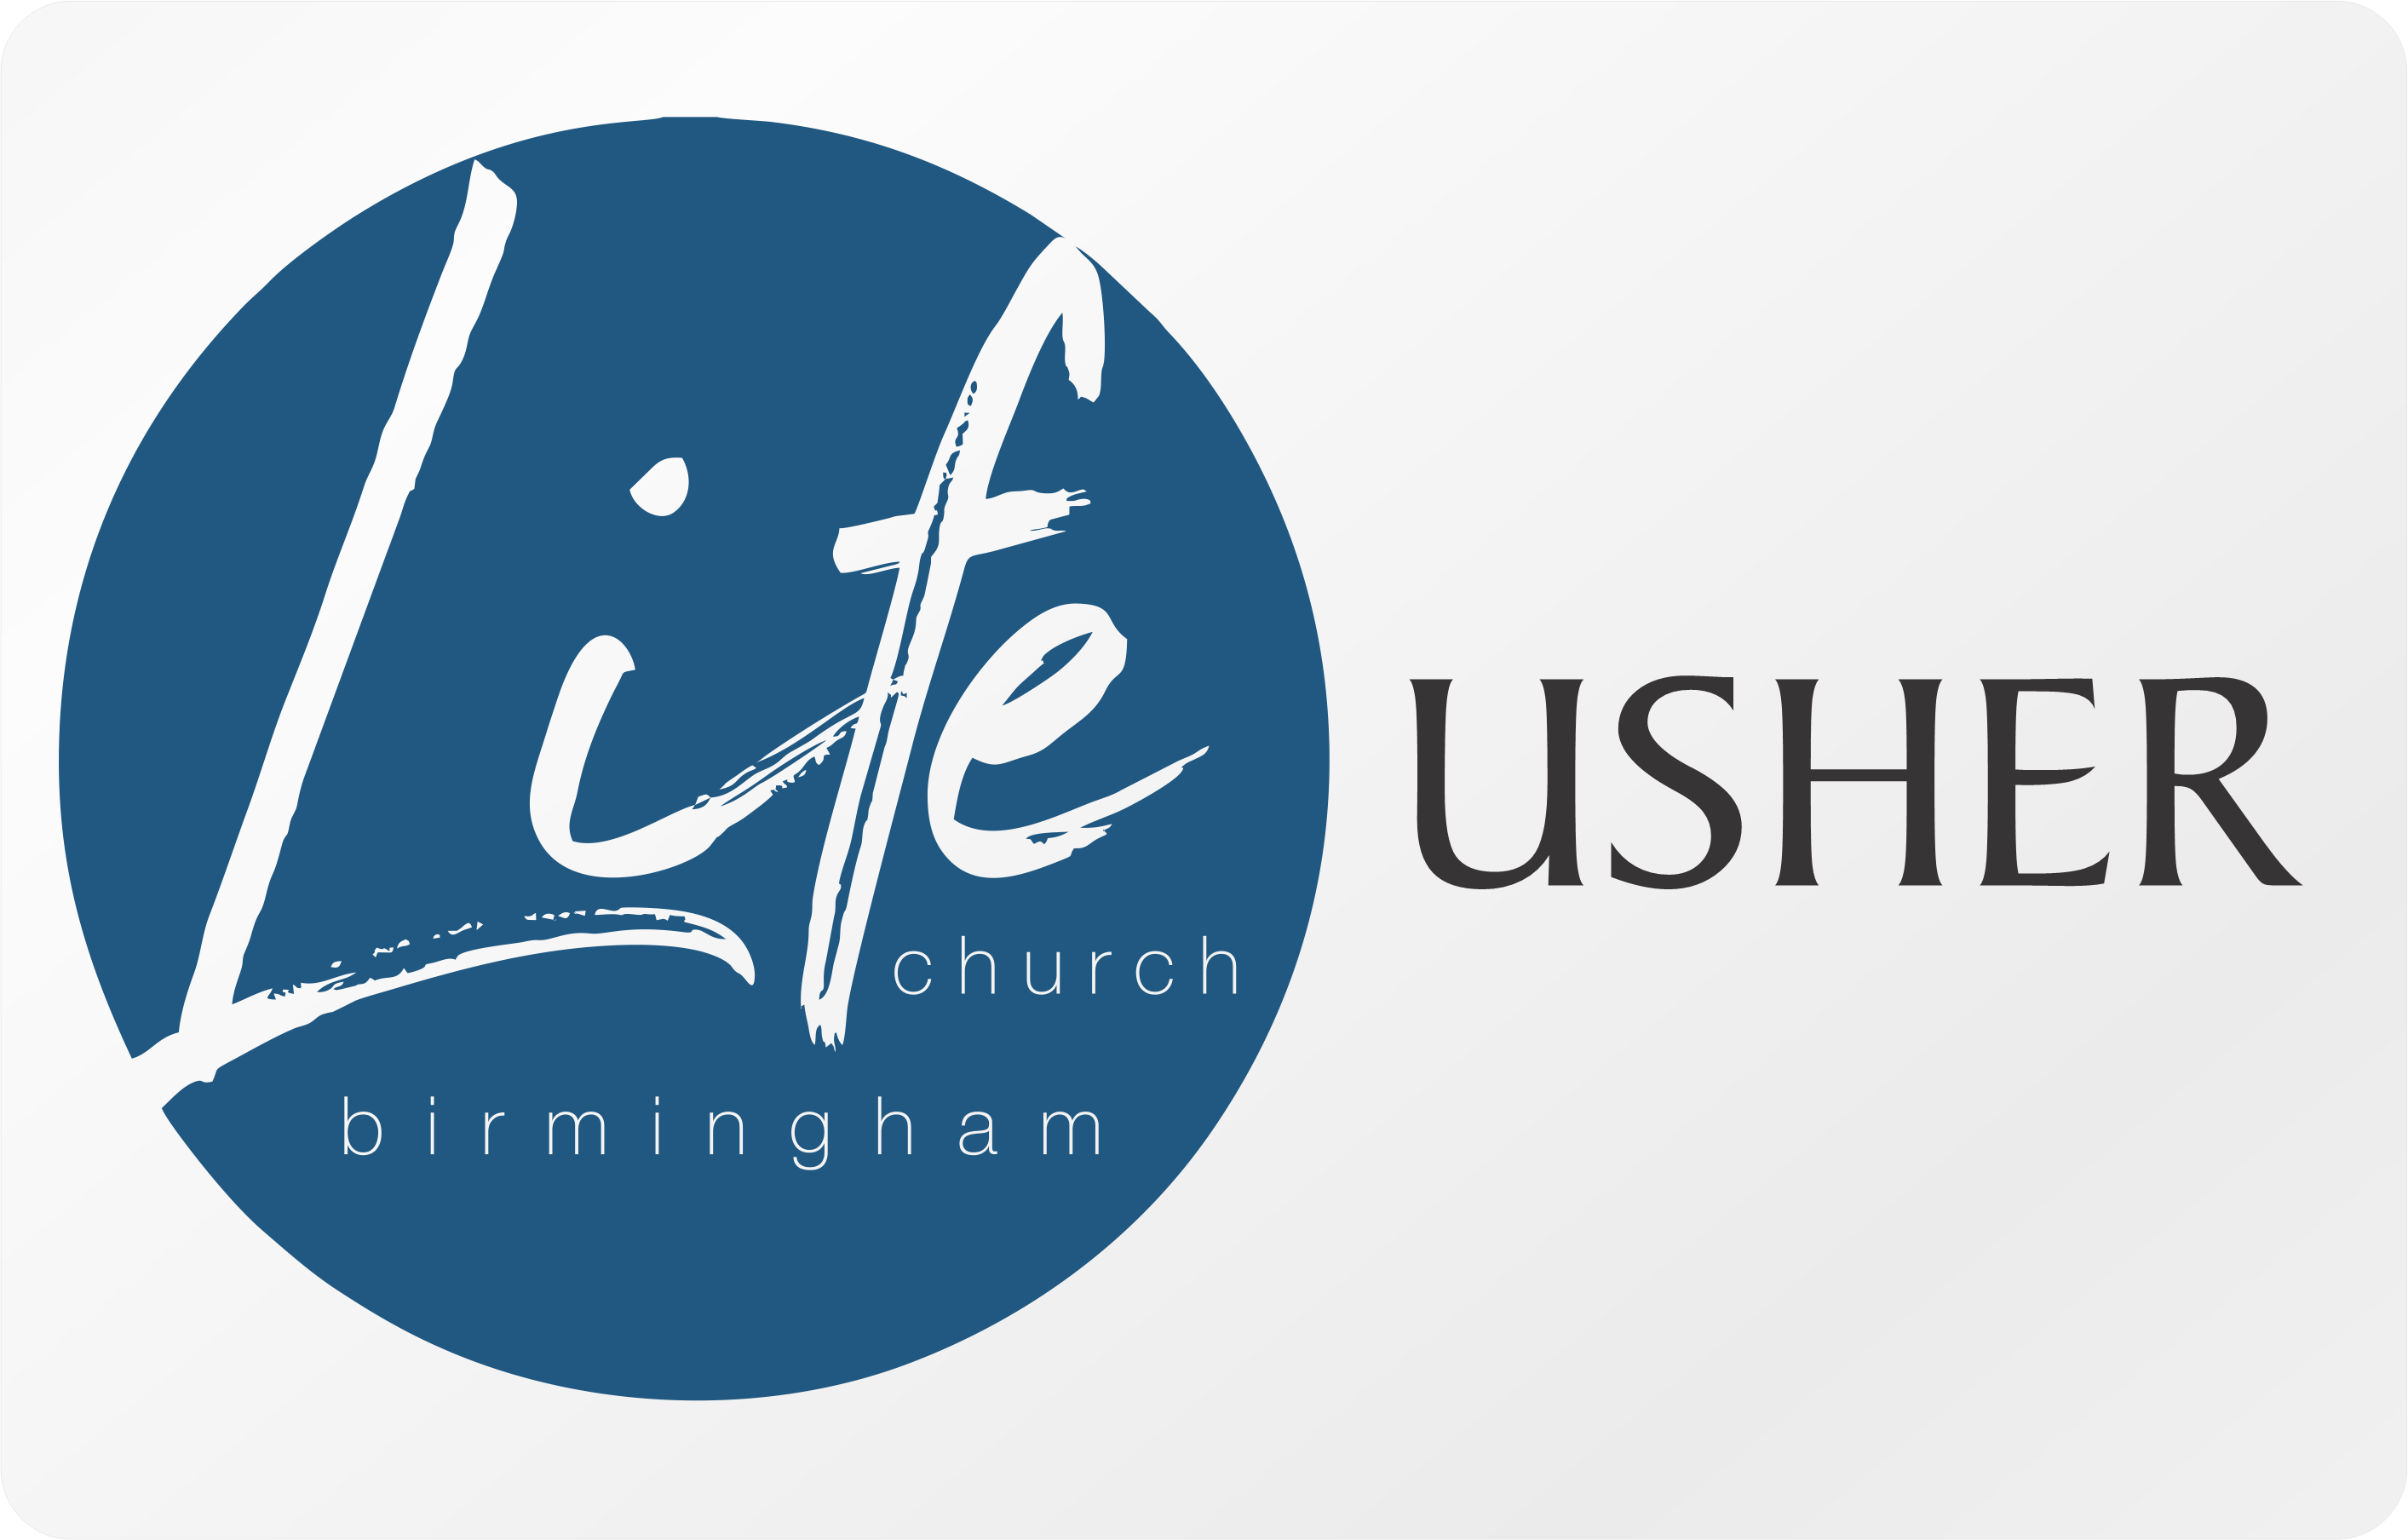 An usher's badge featuring the logo for Live Church Birmingham